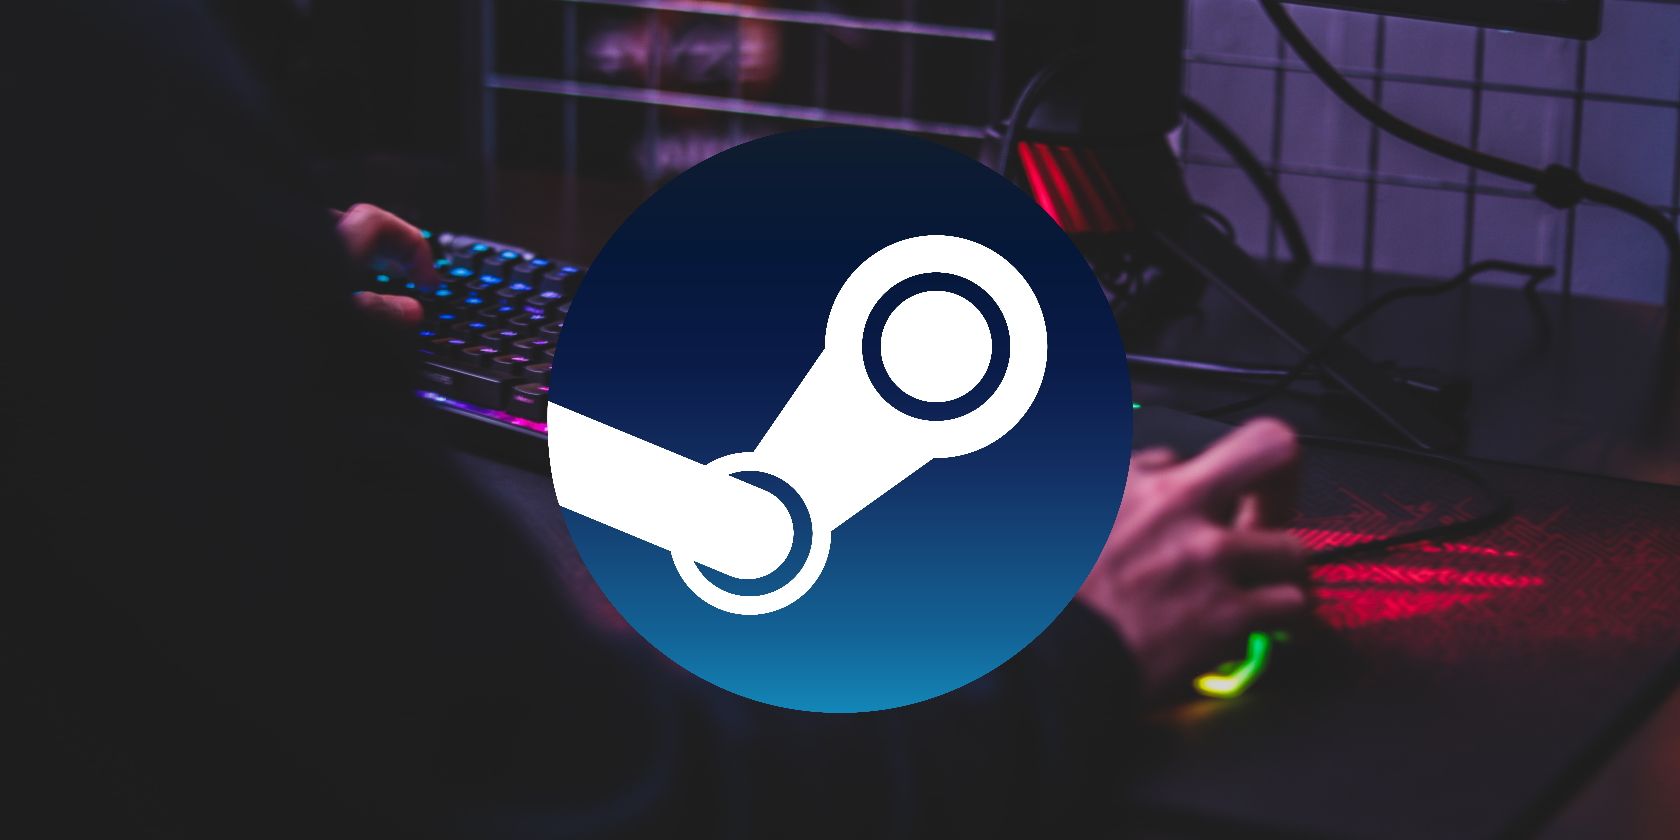 Steam is experiencing issues фото 82